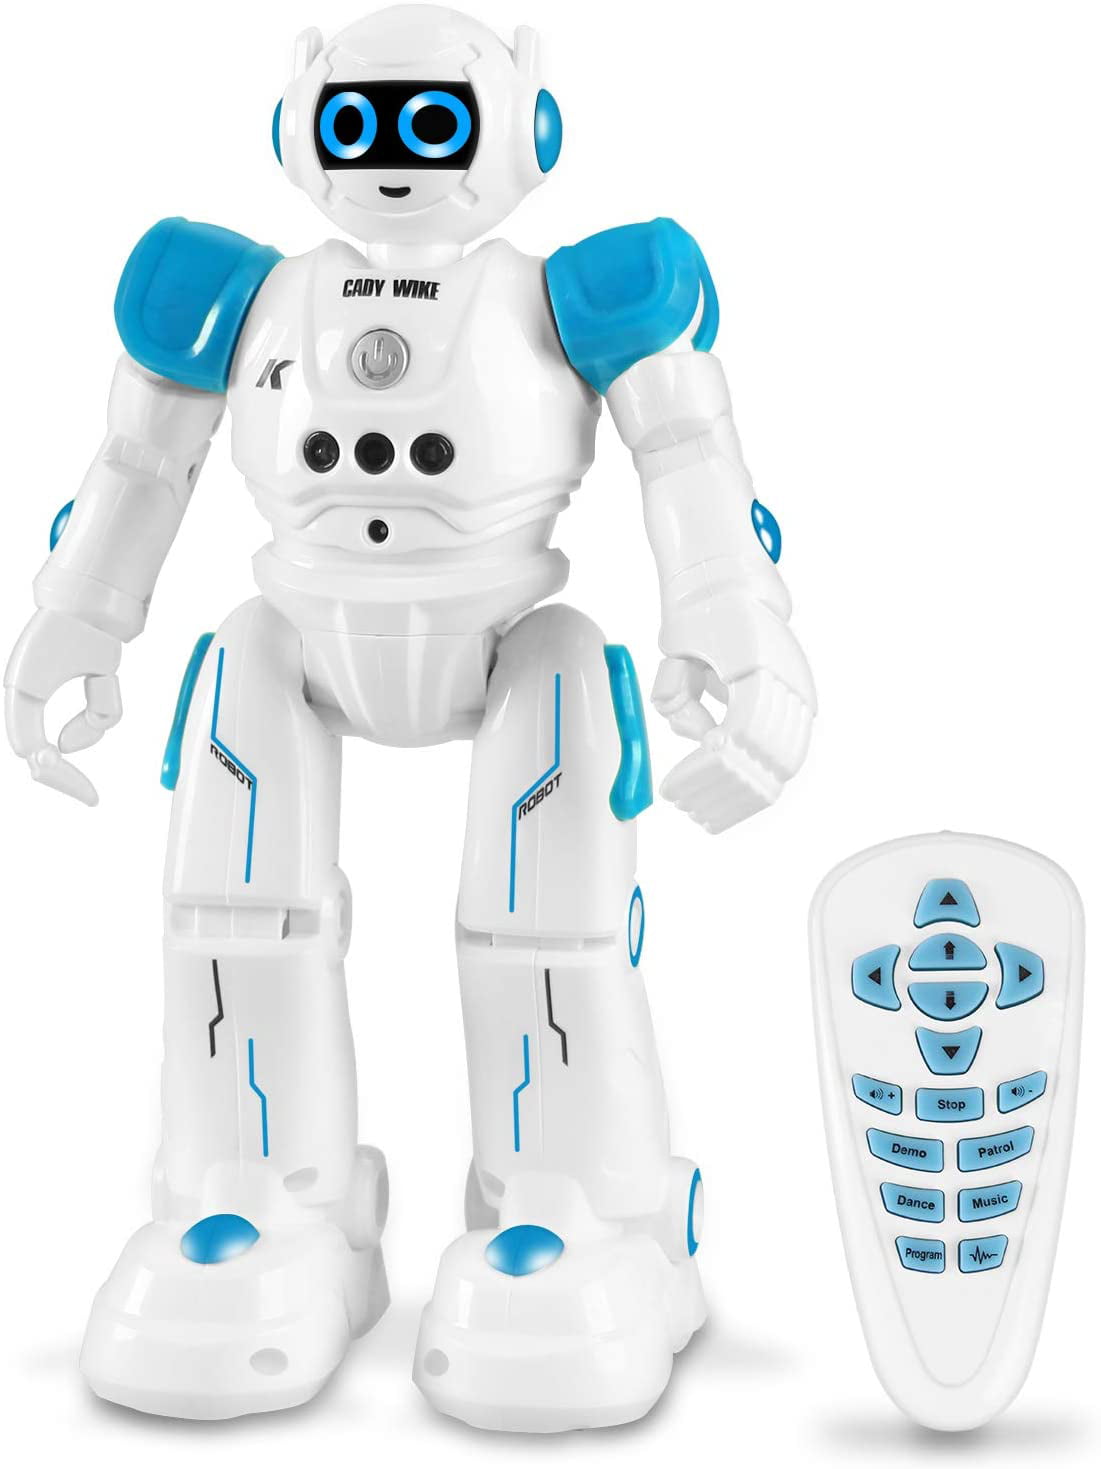 K3 RC Home Robot Dance Play Intelligent Programmable Touch &Sound Control White 